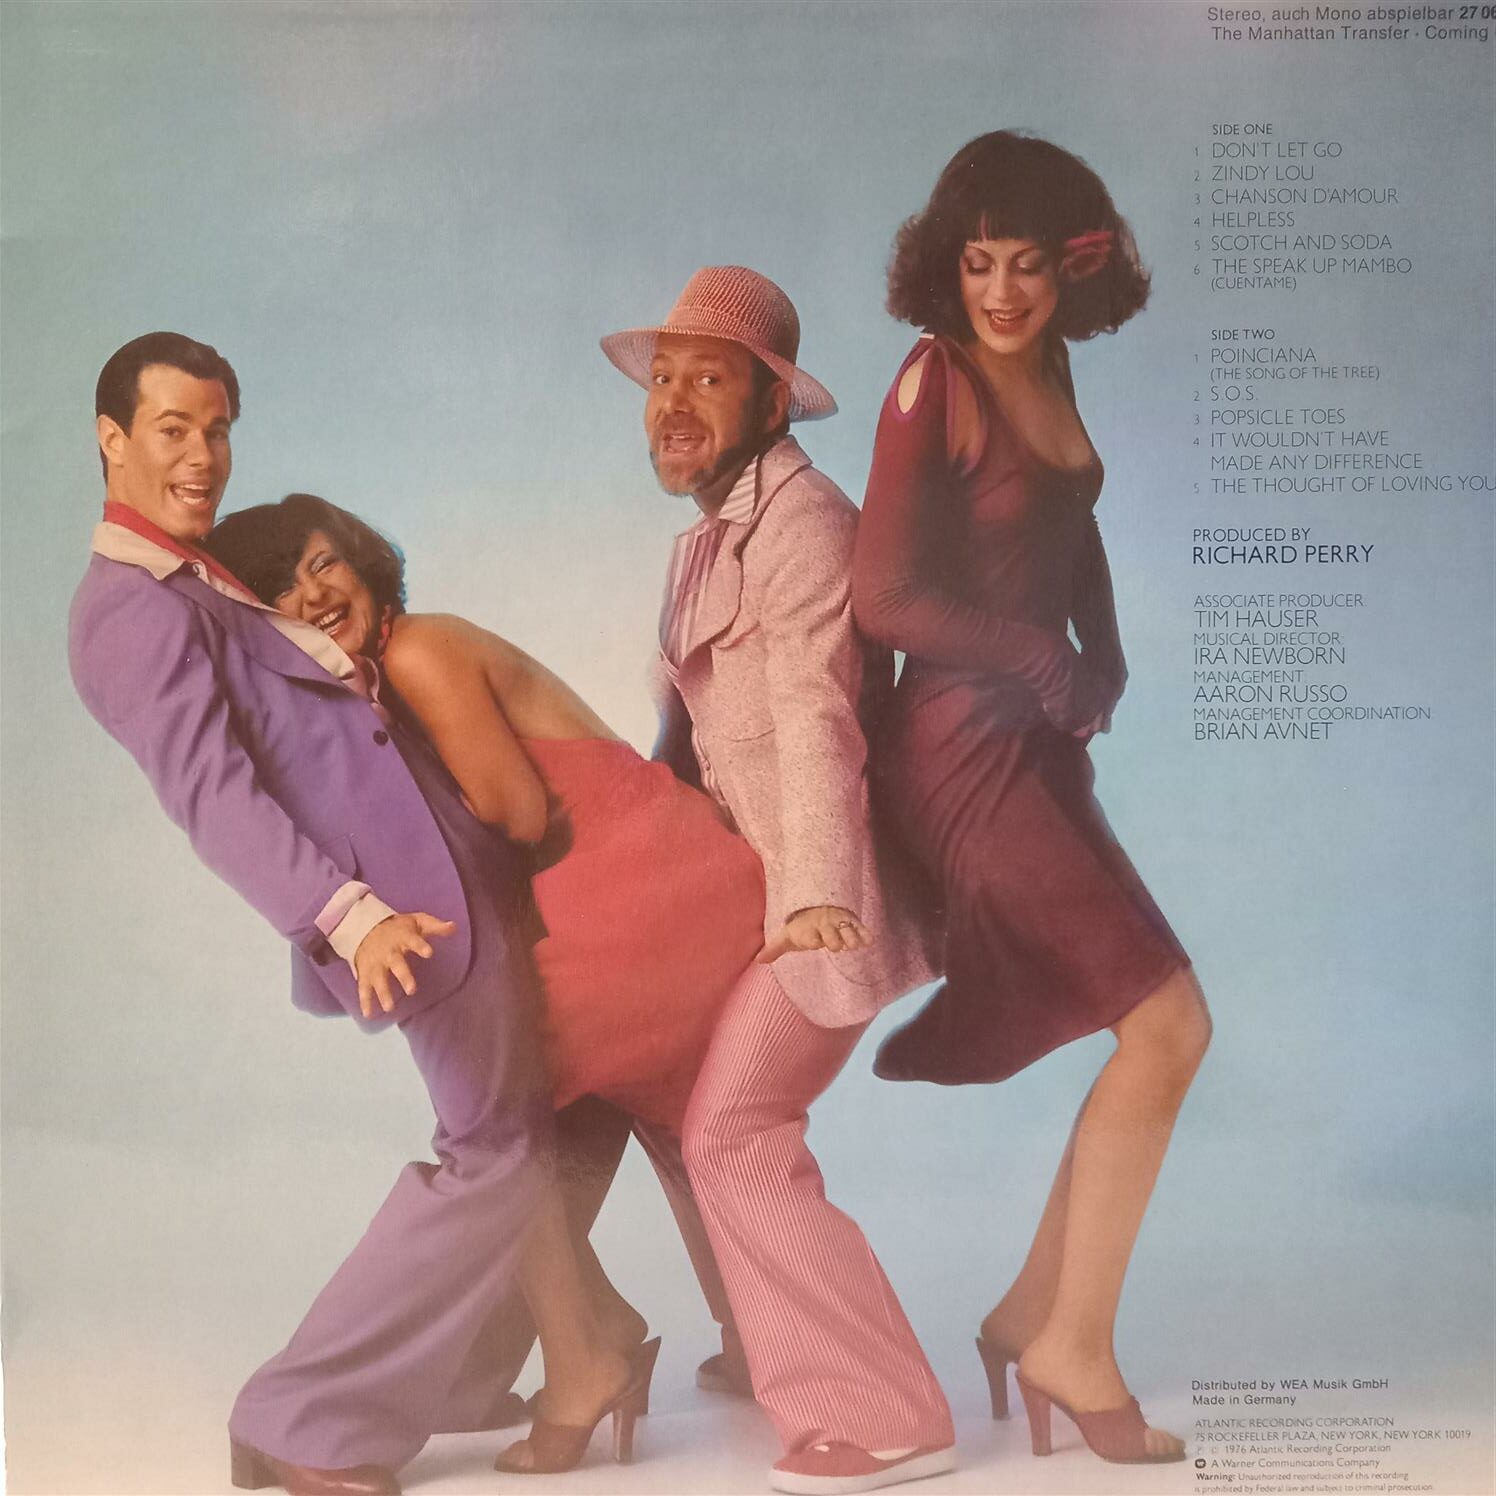 MANHATTAN TRANSFER – COMING OUT ARKA